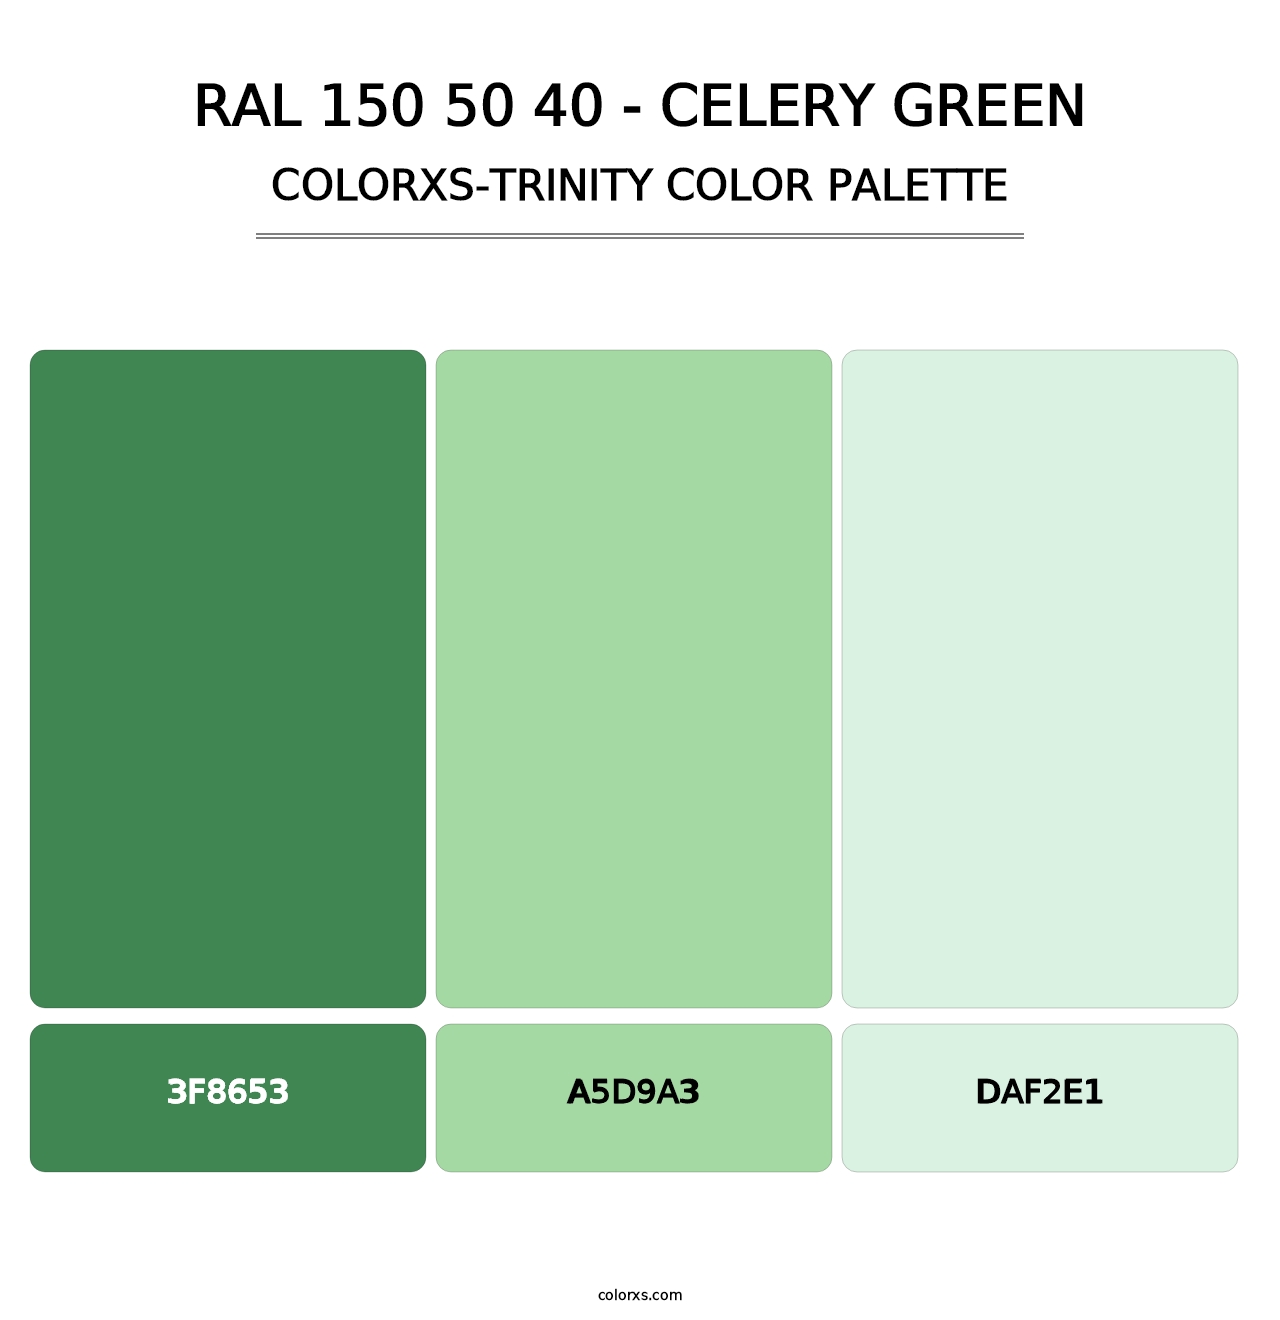 RAL 150 50 40 - Celery Green - Colorxs Trinity Palette